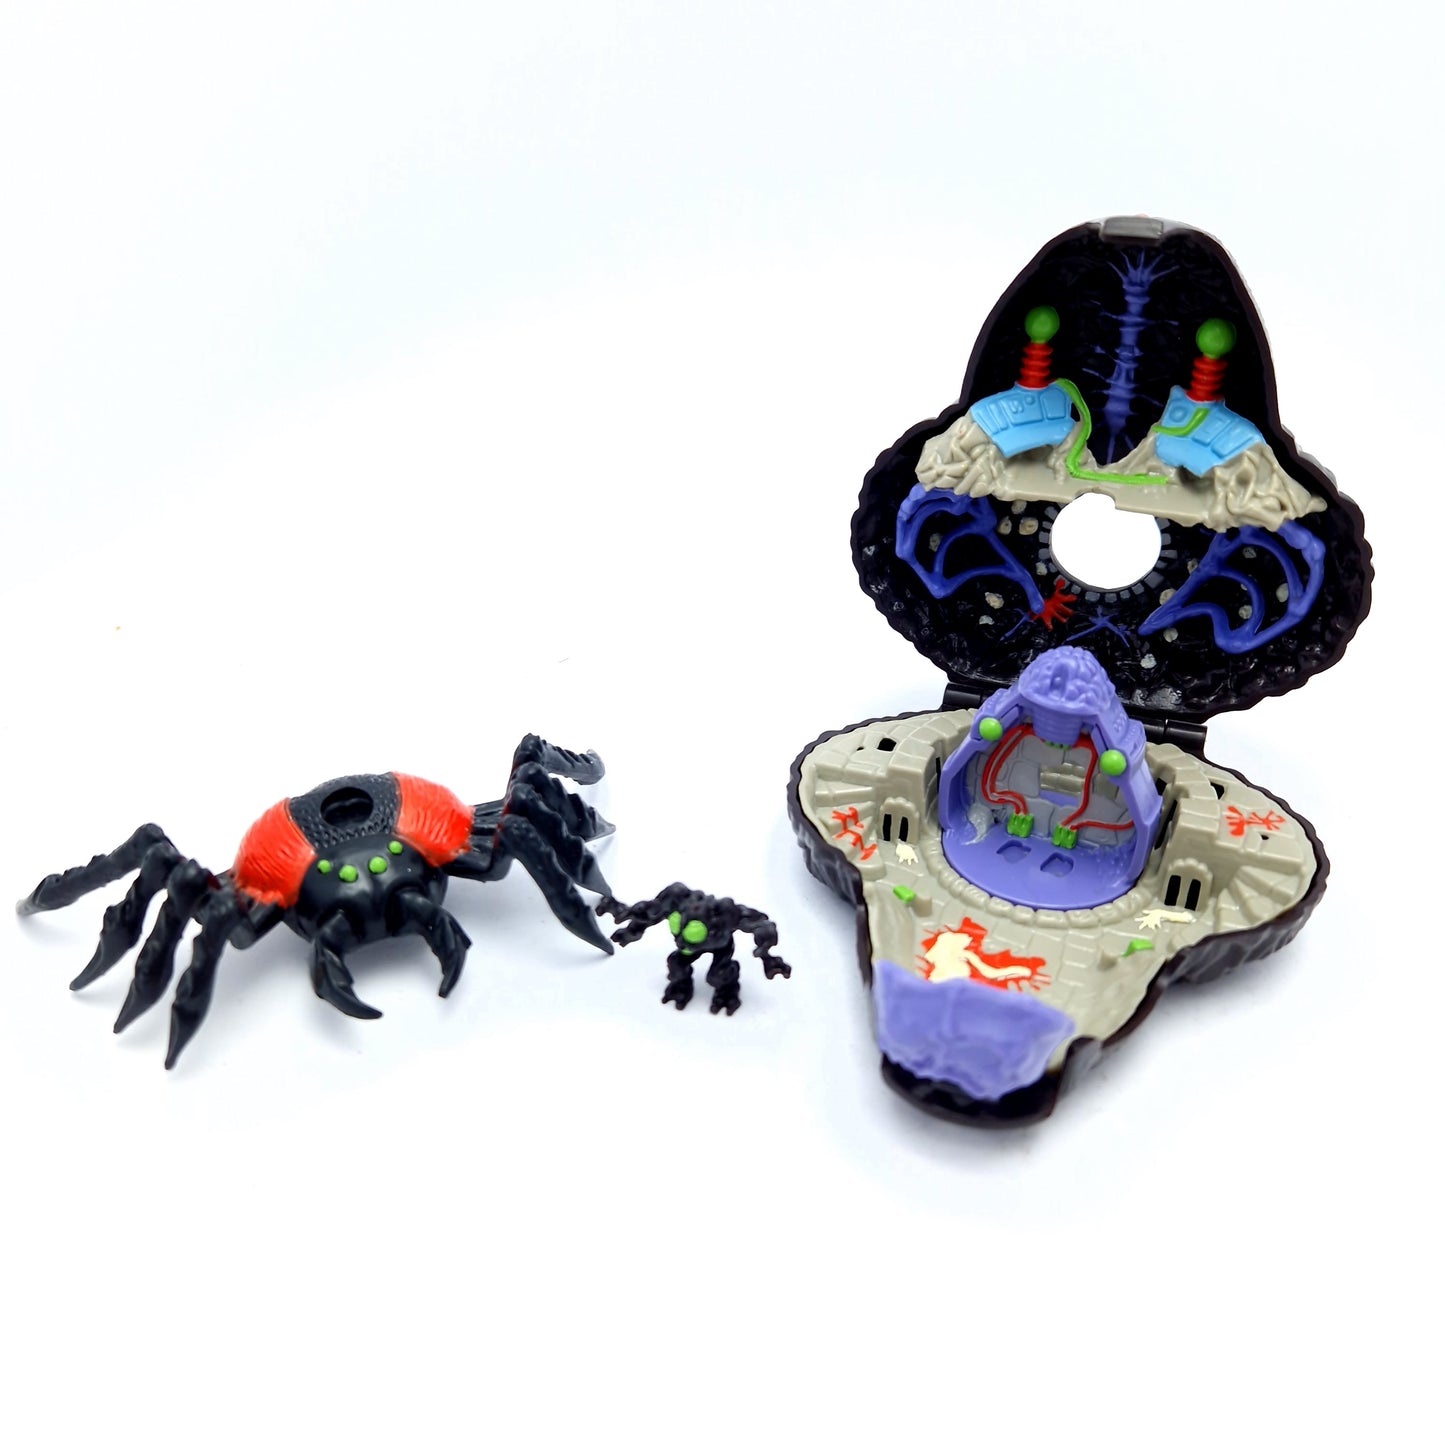 MIGHTY MAX ☆ TRAPPED BY ARACHNOID Doom Zone Vintage Figure Playset ☆ 90s